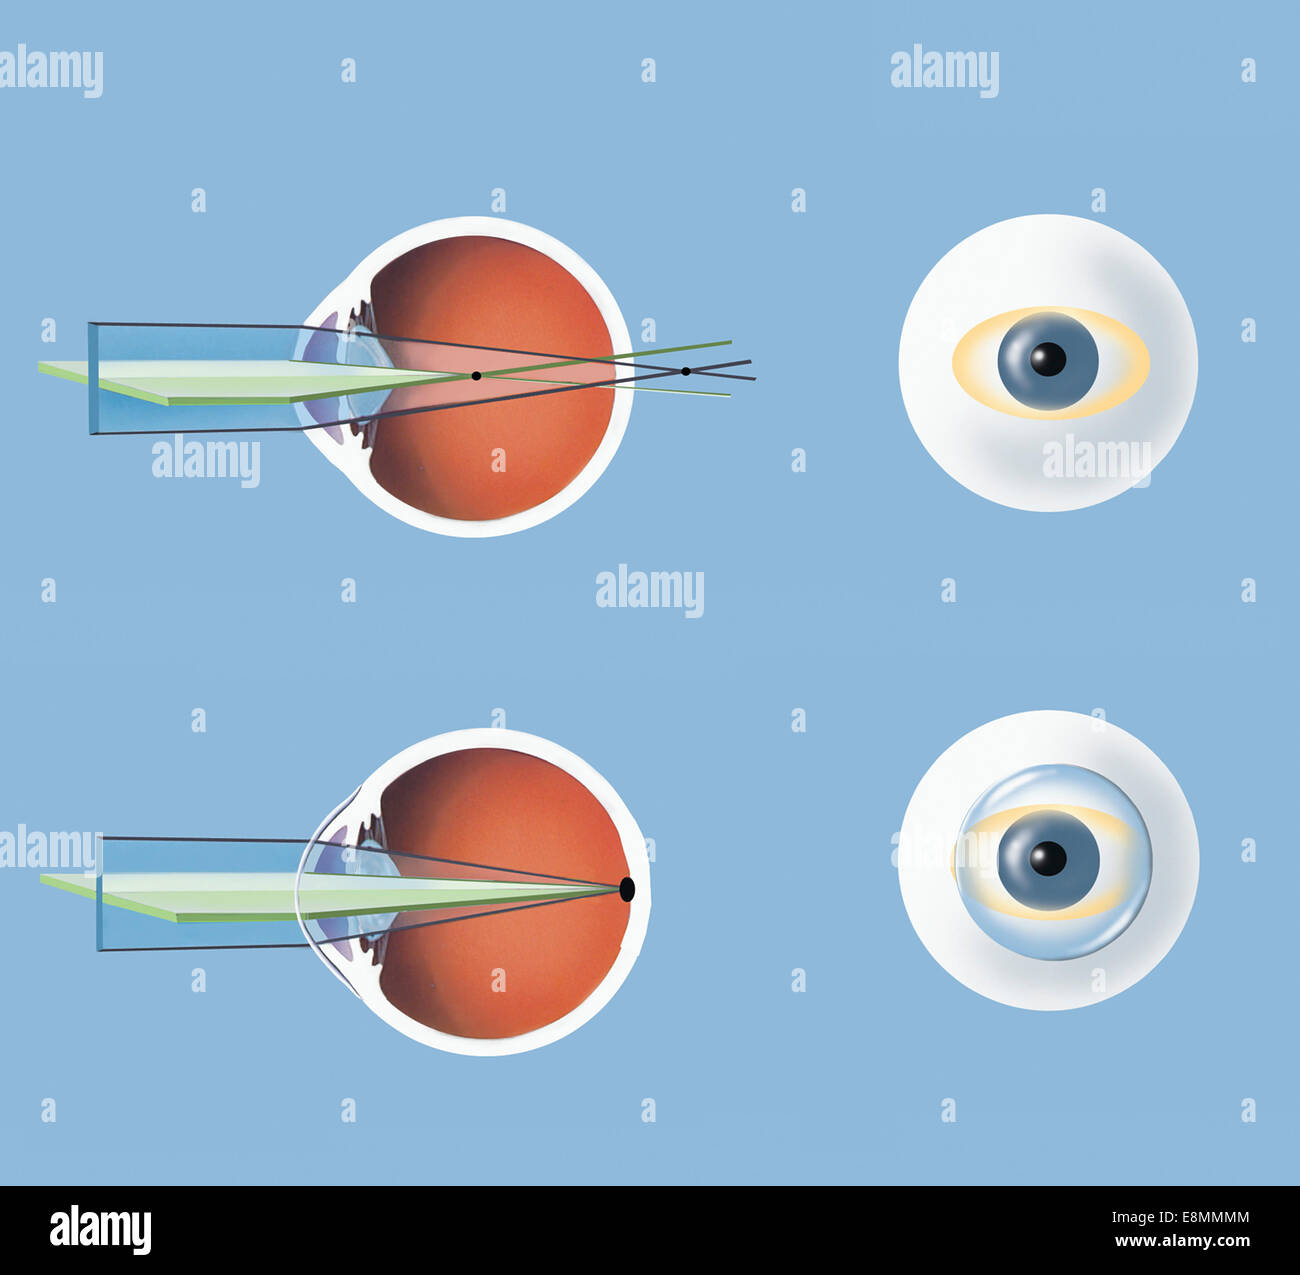 Astigmatism and correction with corrective lens. Stock Photo